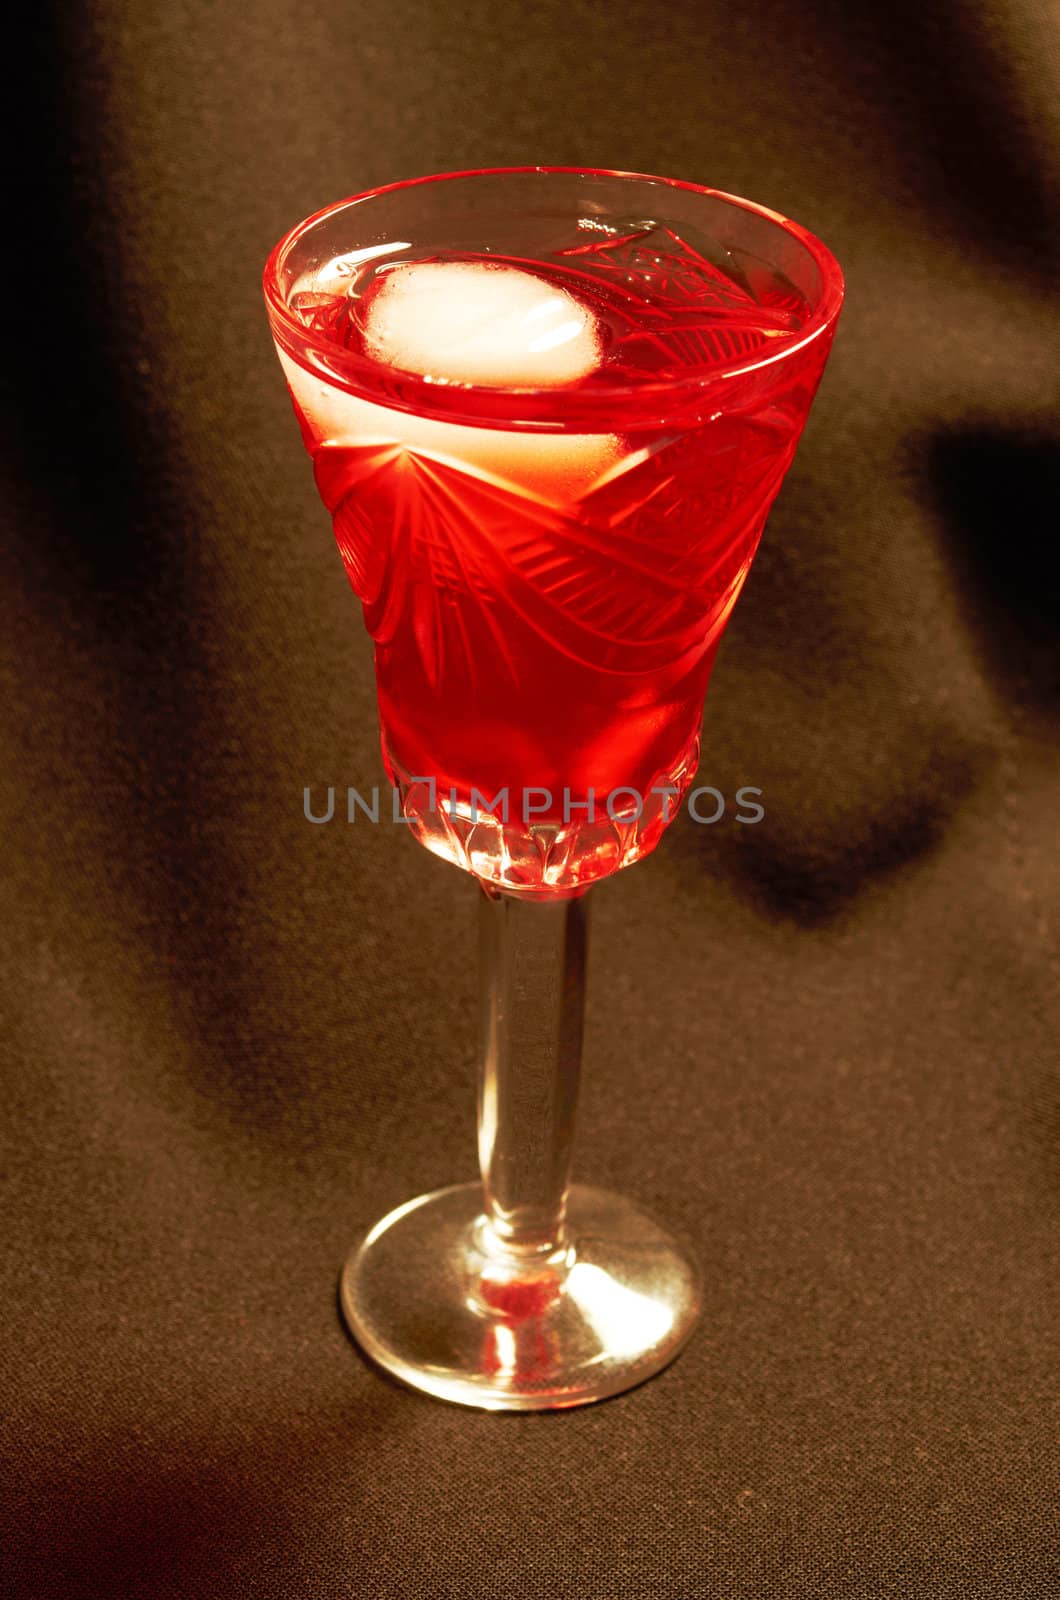 Wineglass by subos